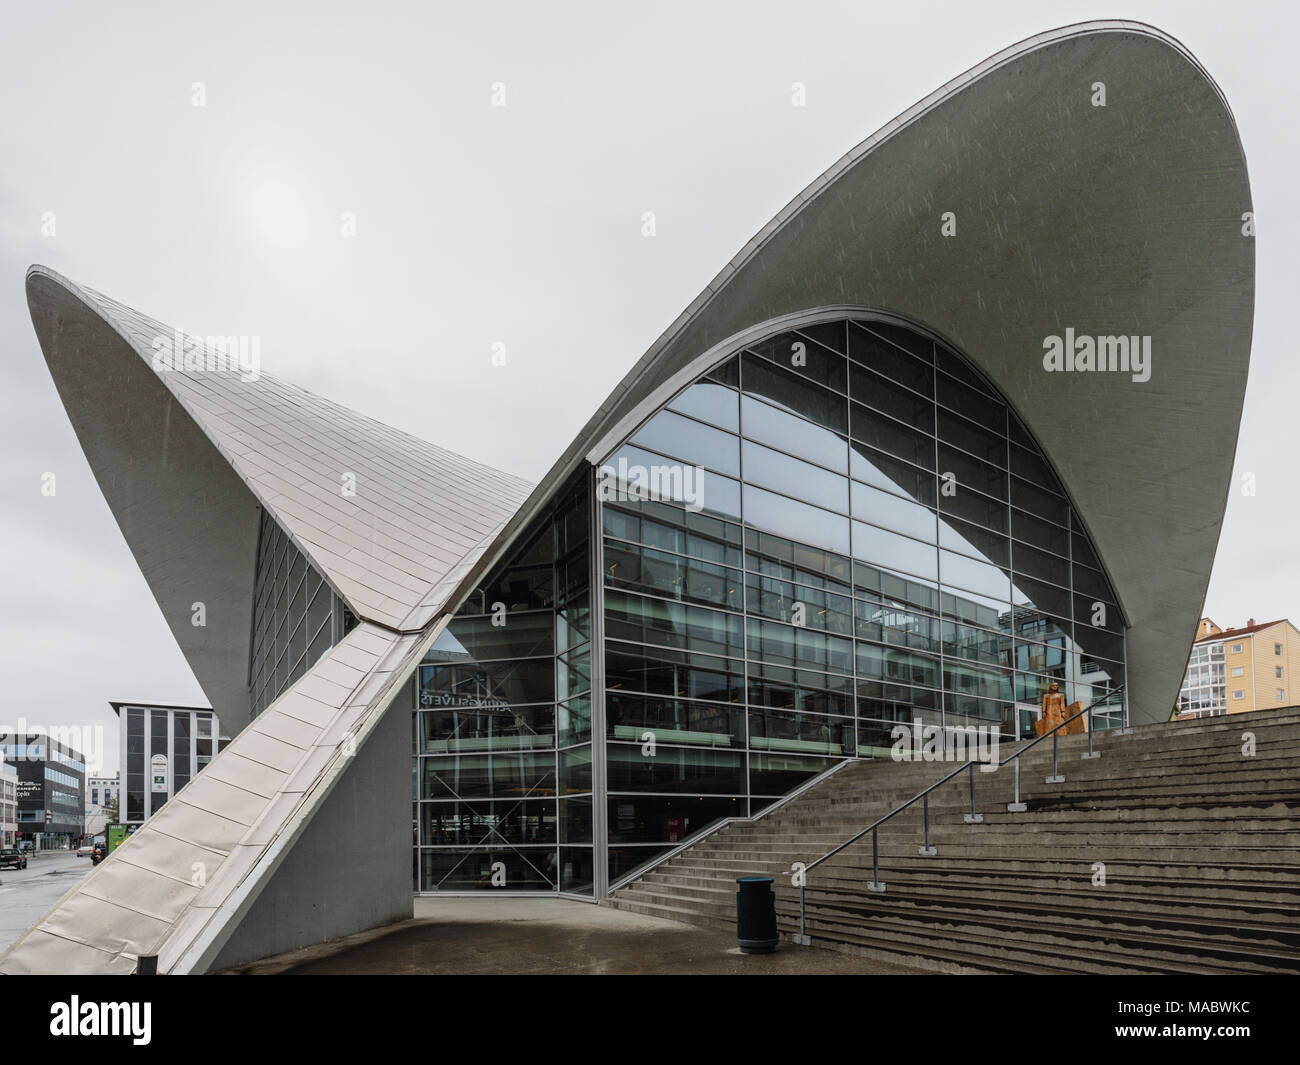 Public Library and Archive, Tromso, Troms, Norway. The curved roof is designed for safely channeling melting snow. Stock Photo